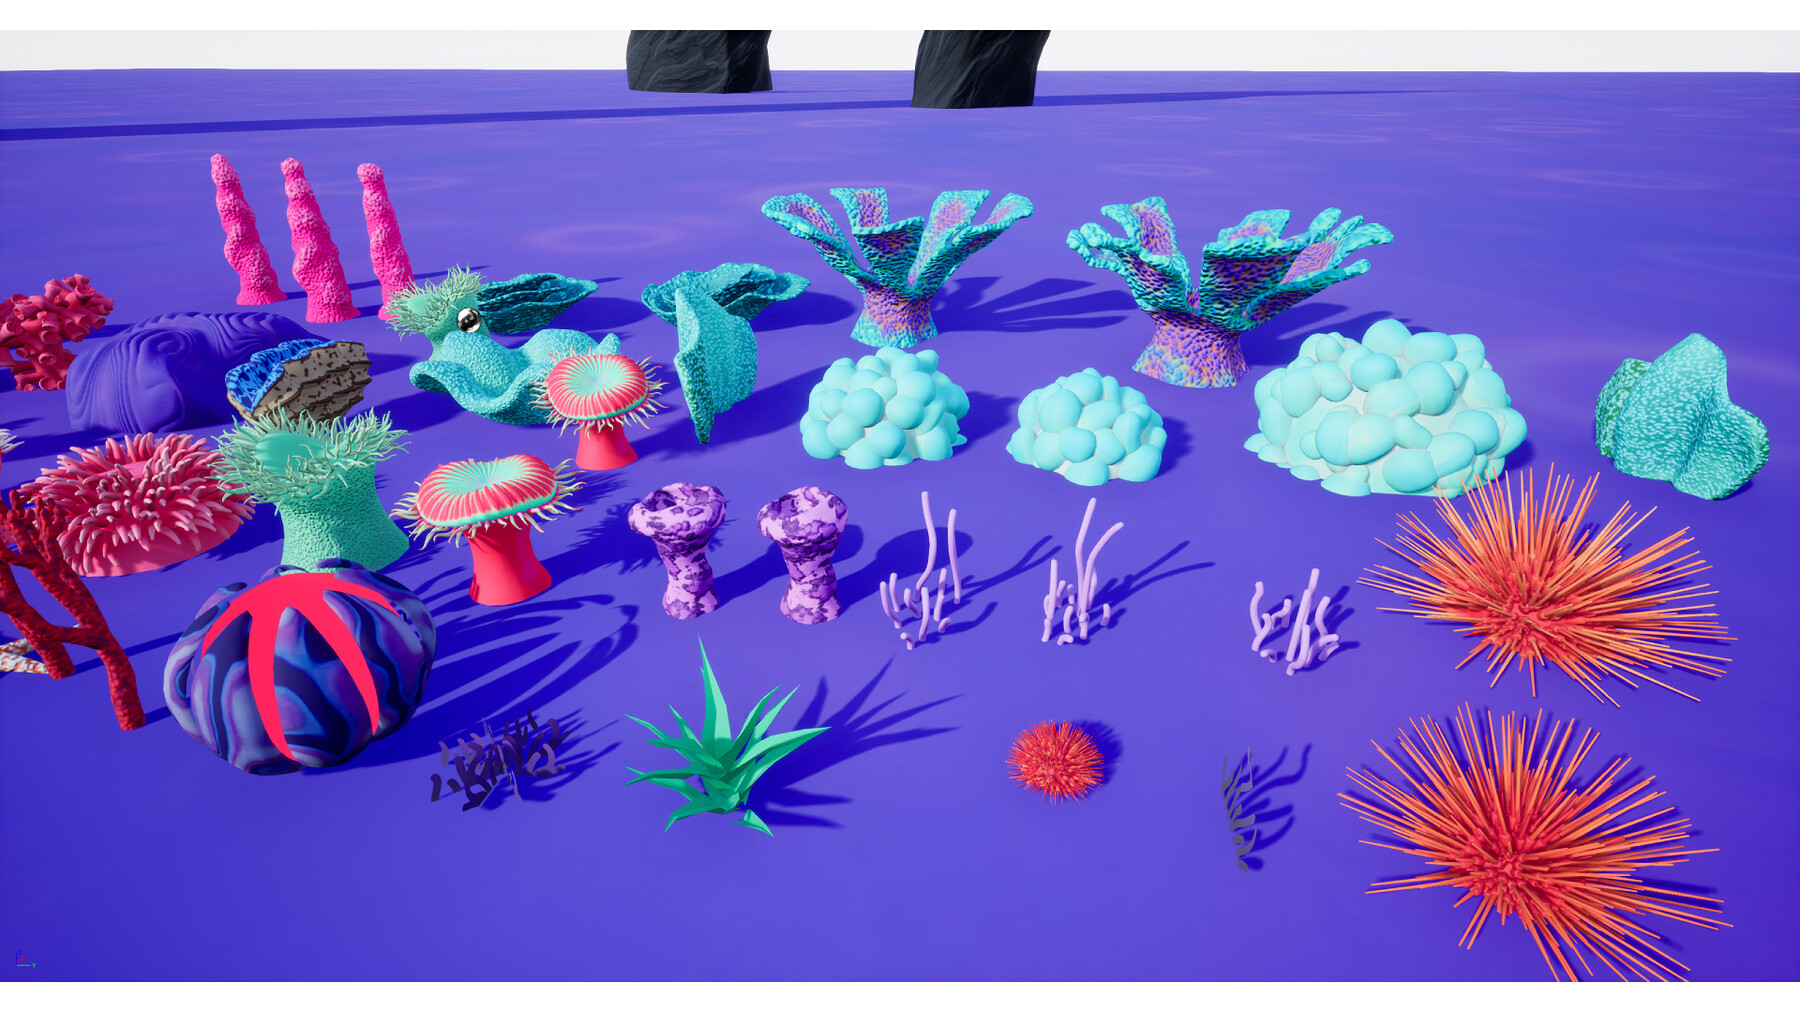 ArtStation - Stylized underwater coral reef environment | Game Assets